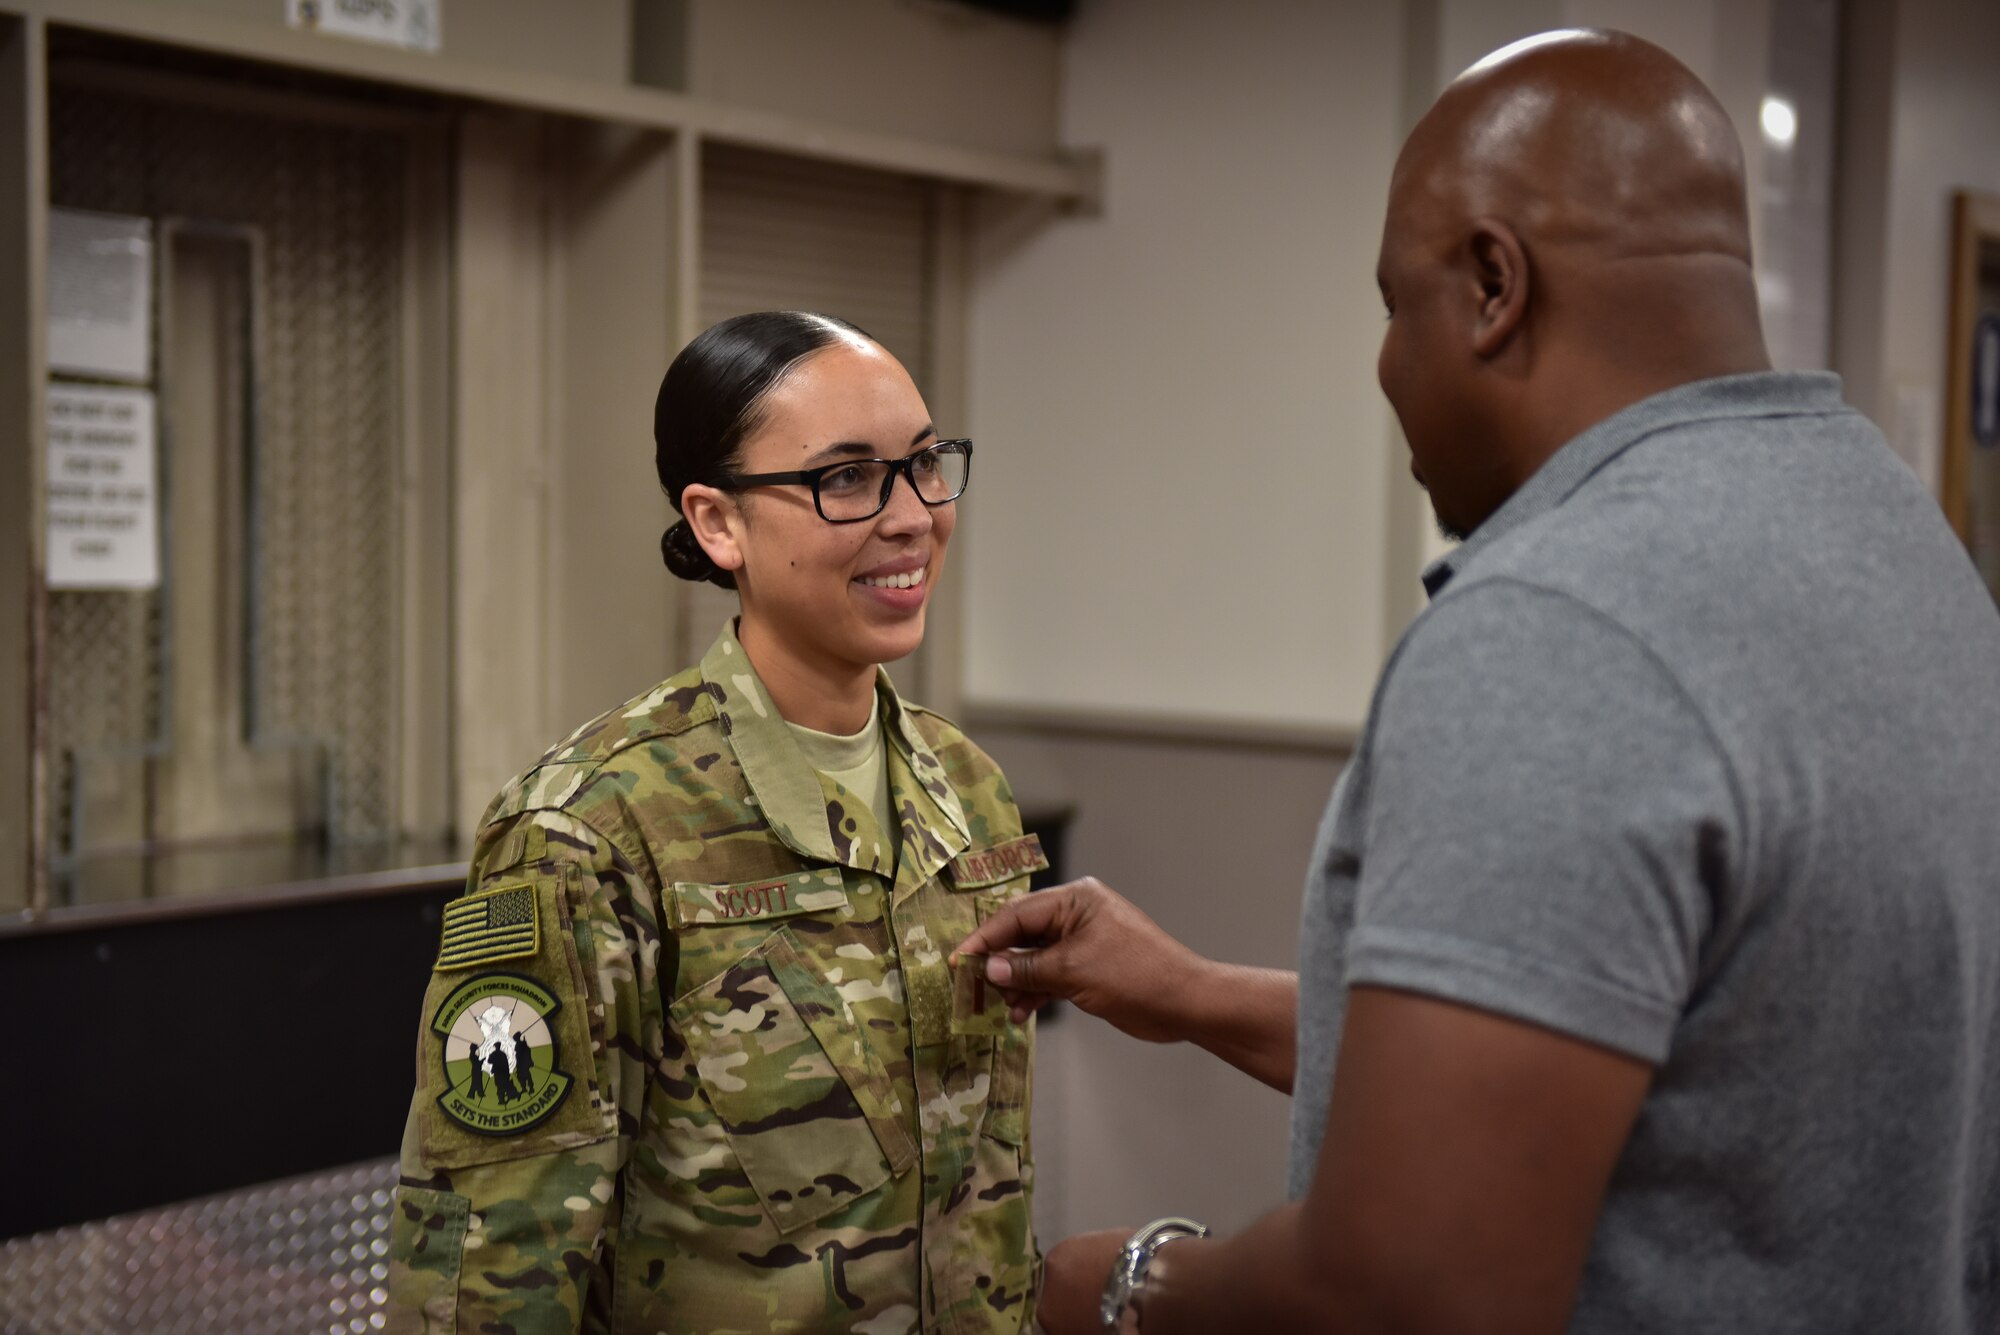 Former Staff Sgt. Jasmine Scott, a member of the 509th Security Forces, receives her second lieutenant rank patch from her father, Ray Deauvearo, Aug. 10, 2018, at Whiteman Air Force Base, Mo. Scott earned her commission as a health services administrator and will attend a five-and-a-half-week Commissioned Officer Training course before starting her first medical assignment. (U.S. Air Force photo by Tech. Sgt. Alexander W. Riedel)